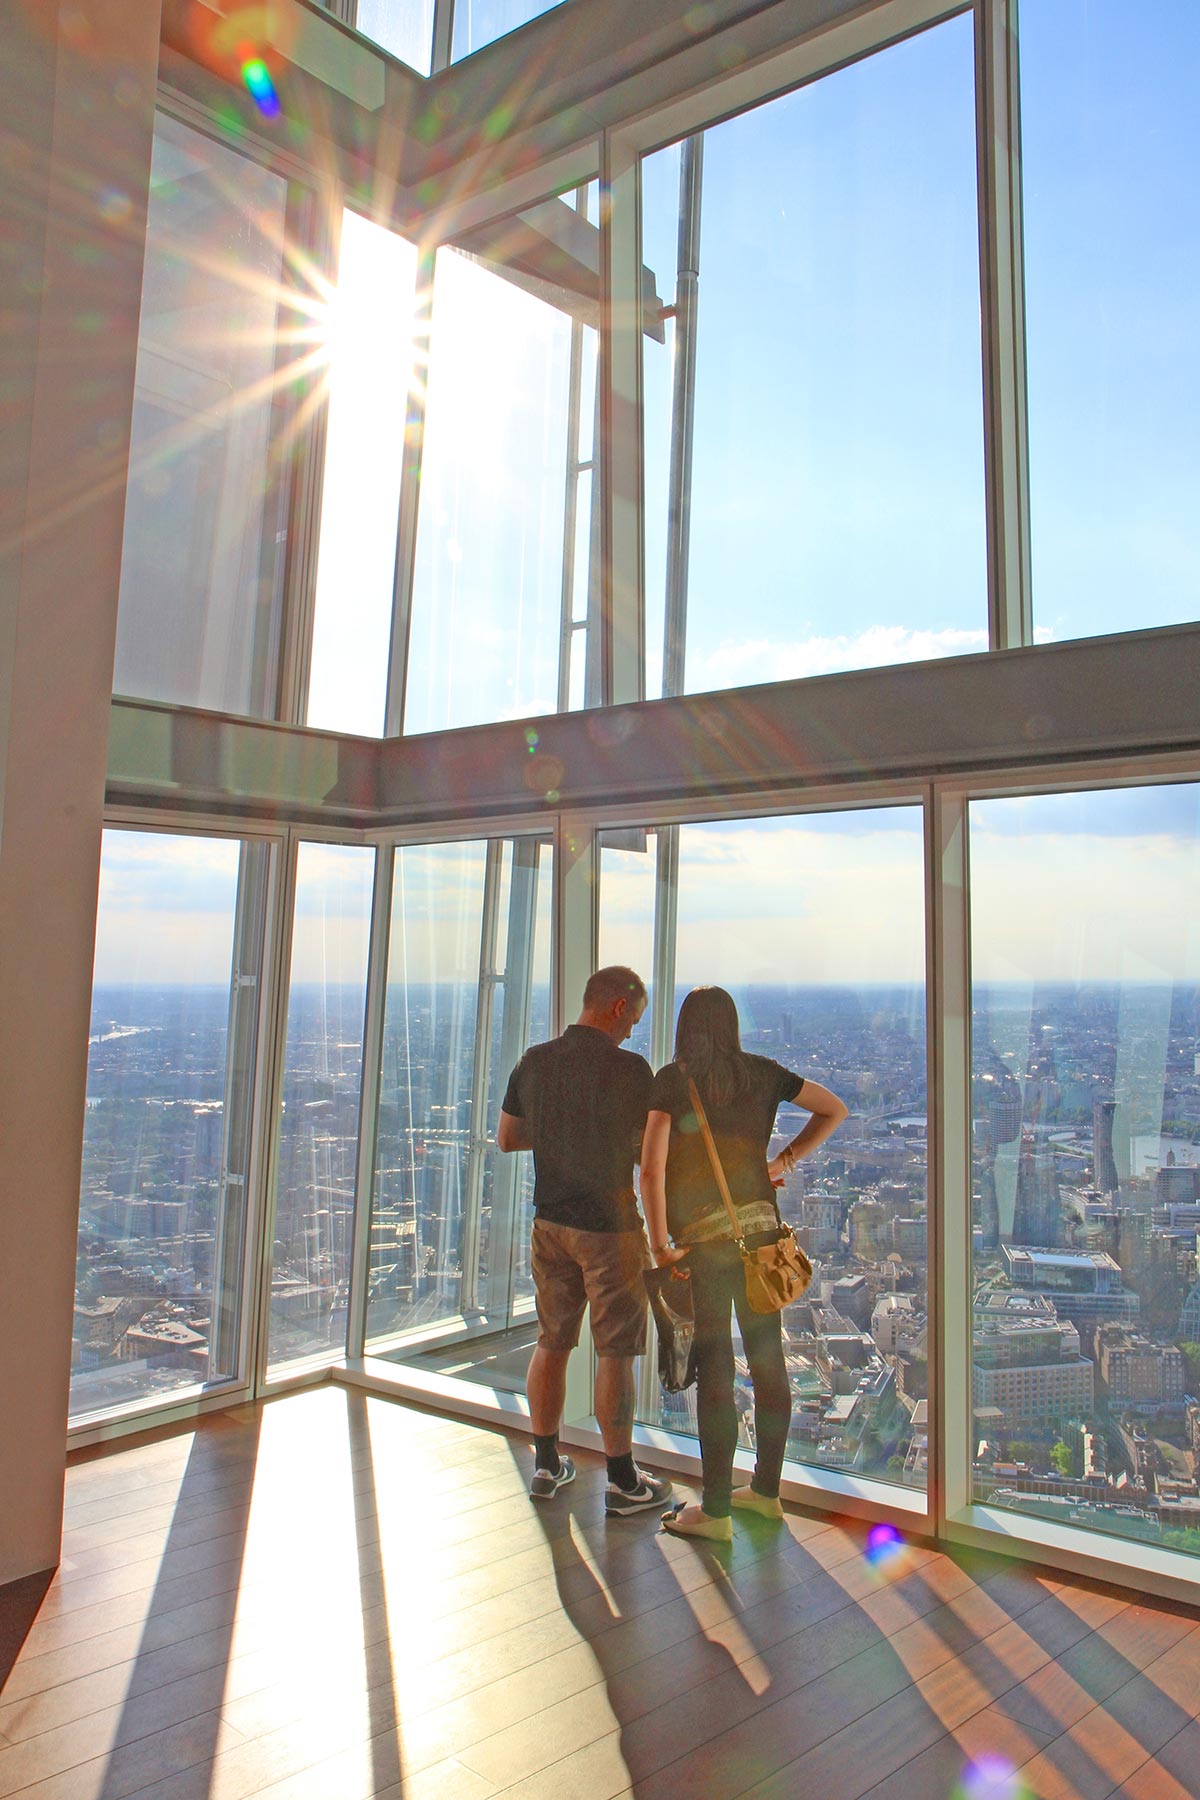 The View from the Shard